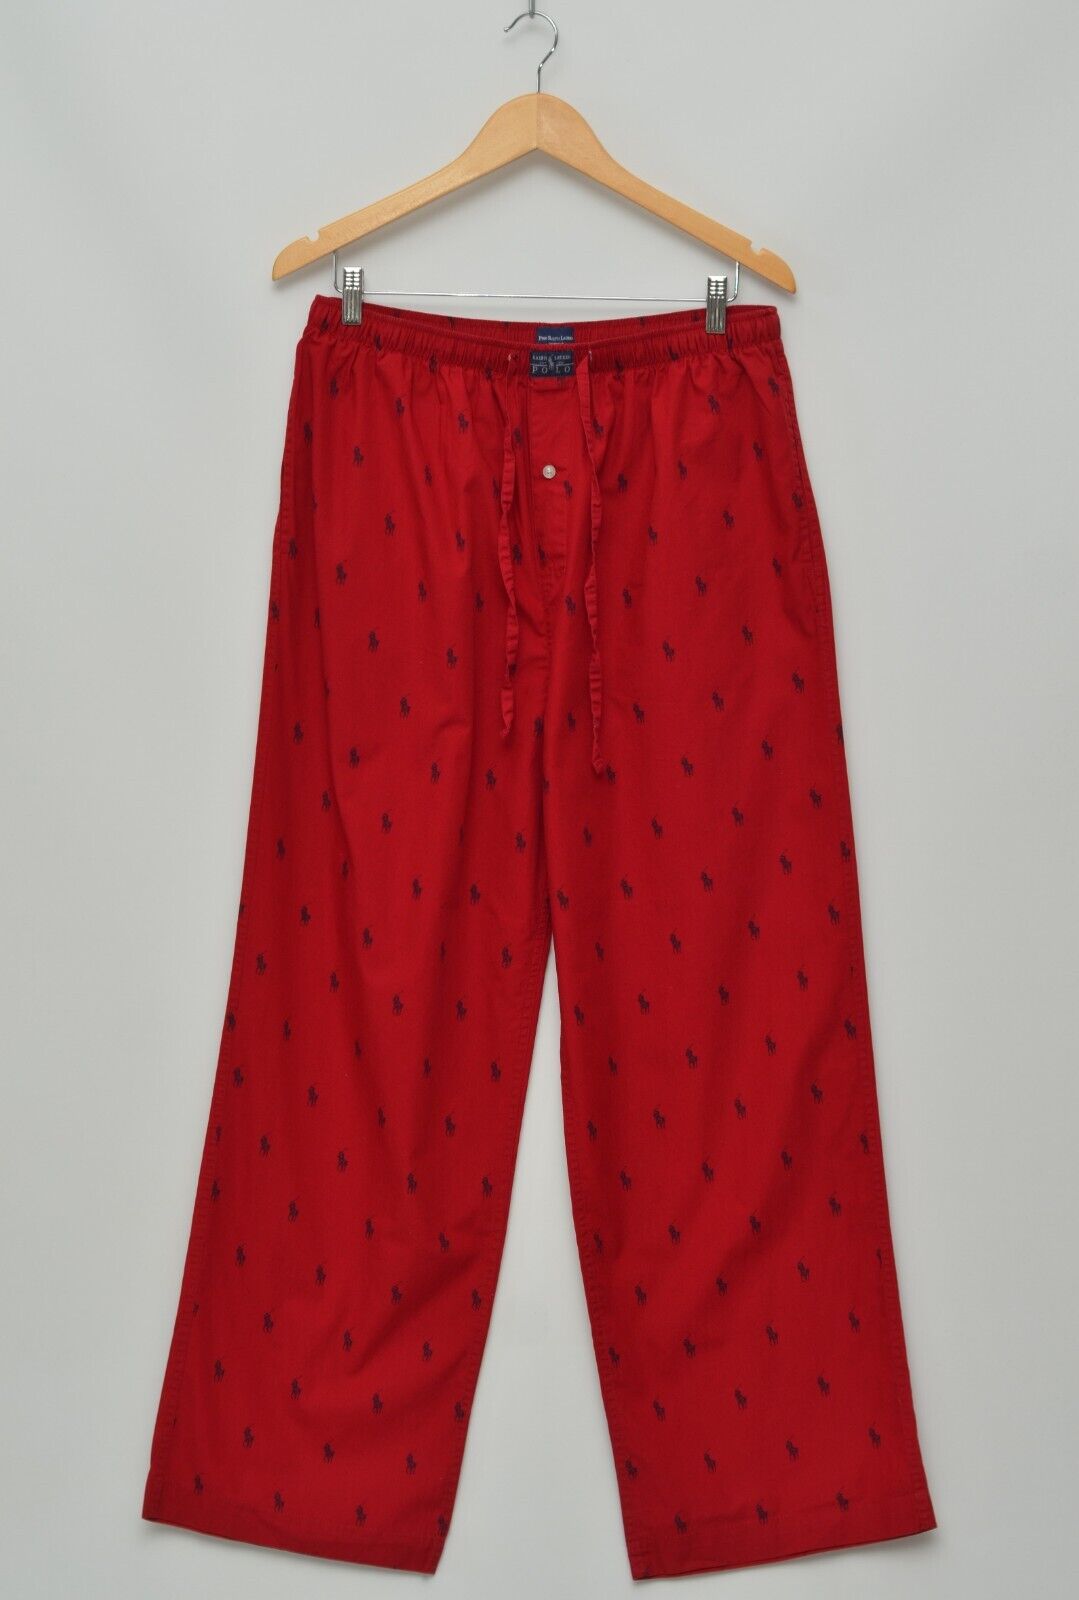 Polo Ralph Lauren Pony Monogram Adjustable Drawstring Waist Relaxed Pant  Mens Fashion Bottoms Trousers on Carousell